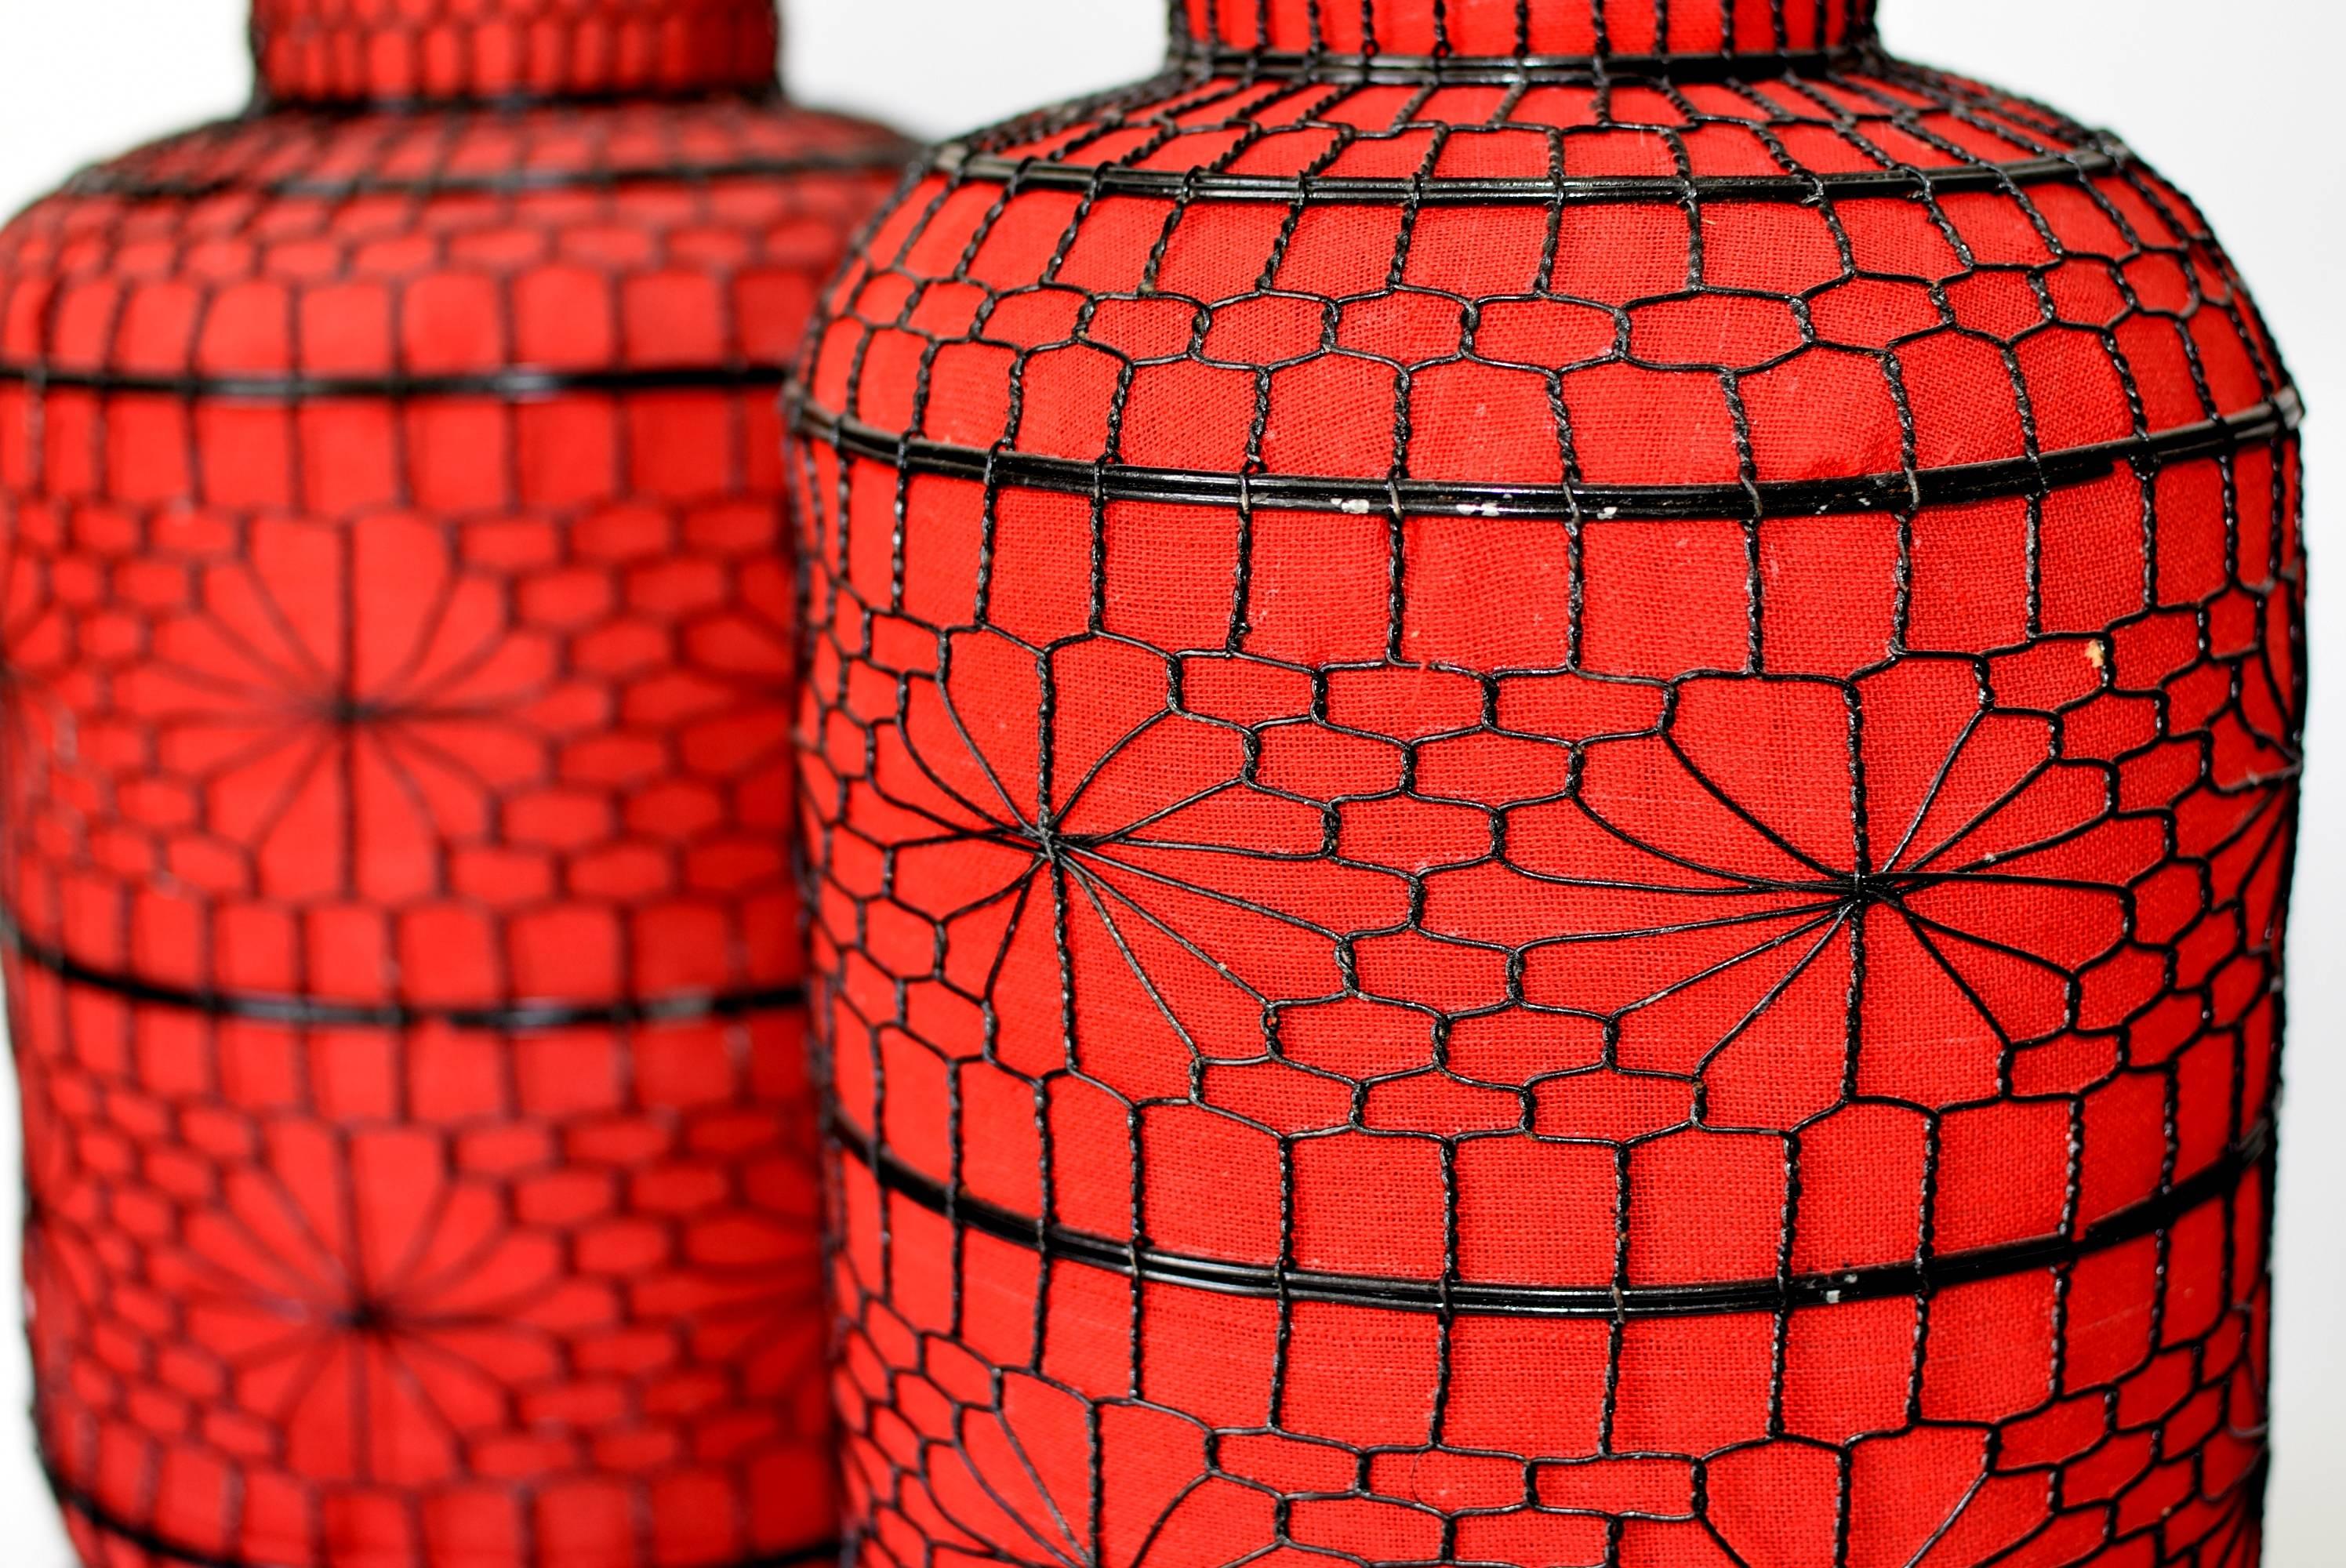 red lanterns for sale